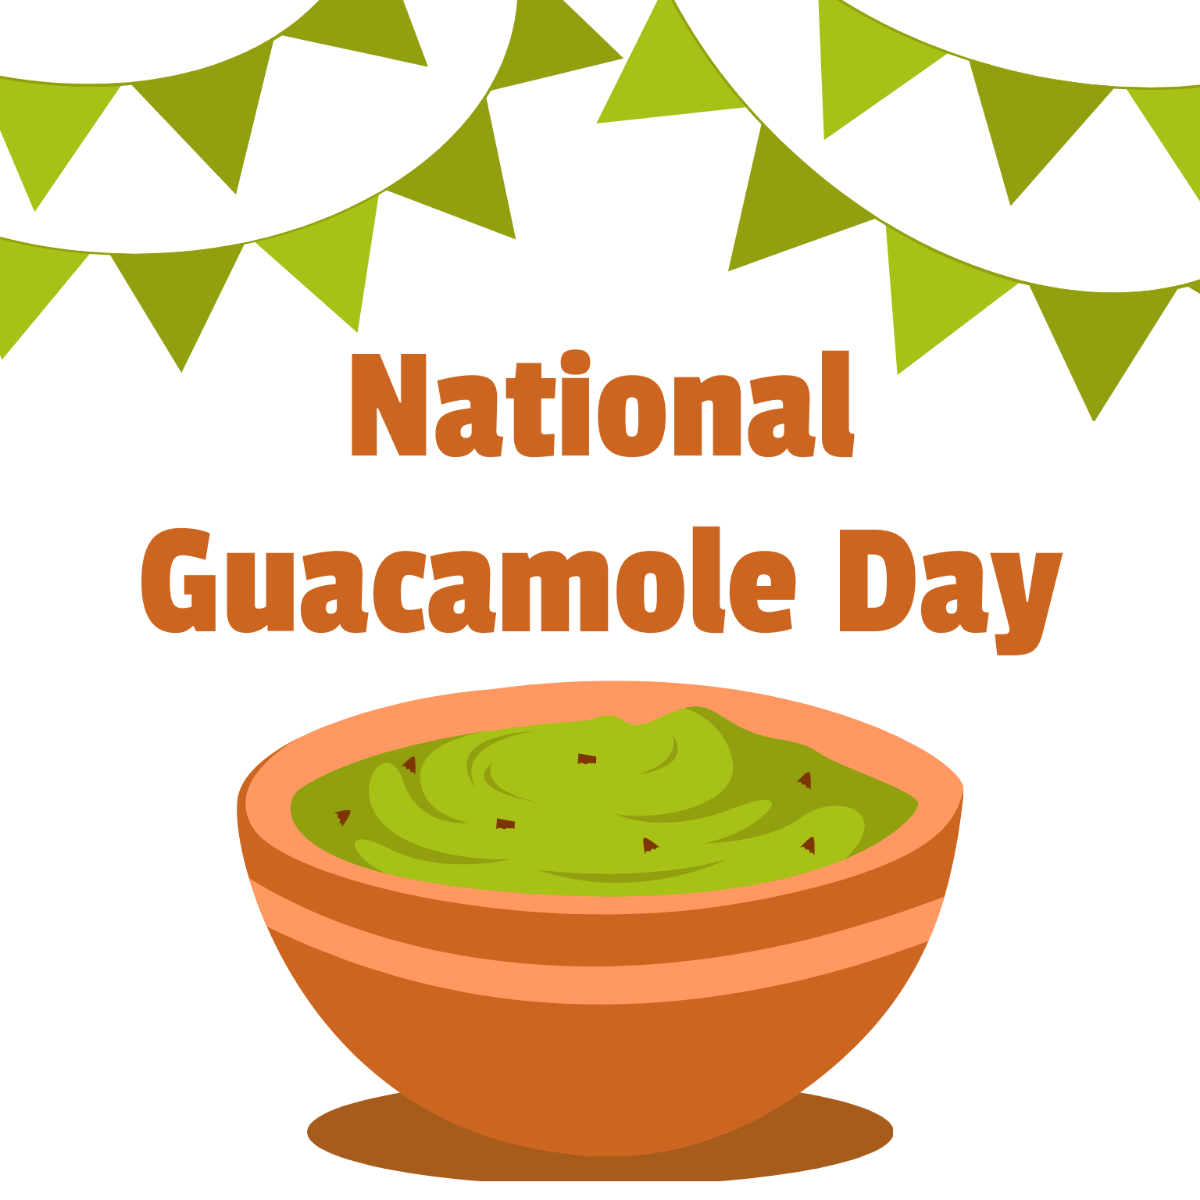 National Guacamole Day Illustration Template